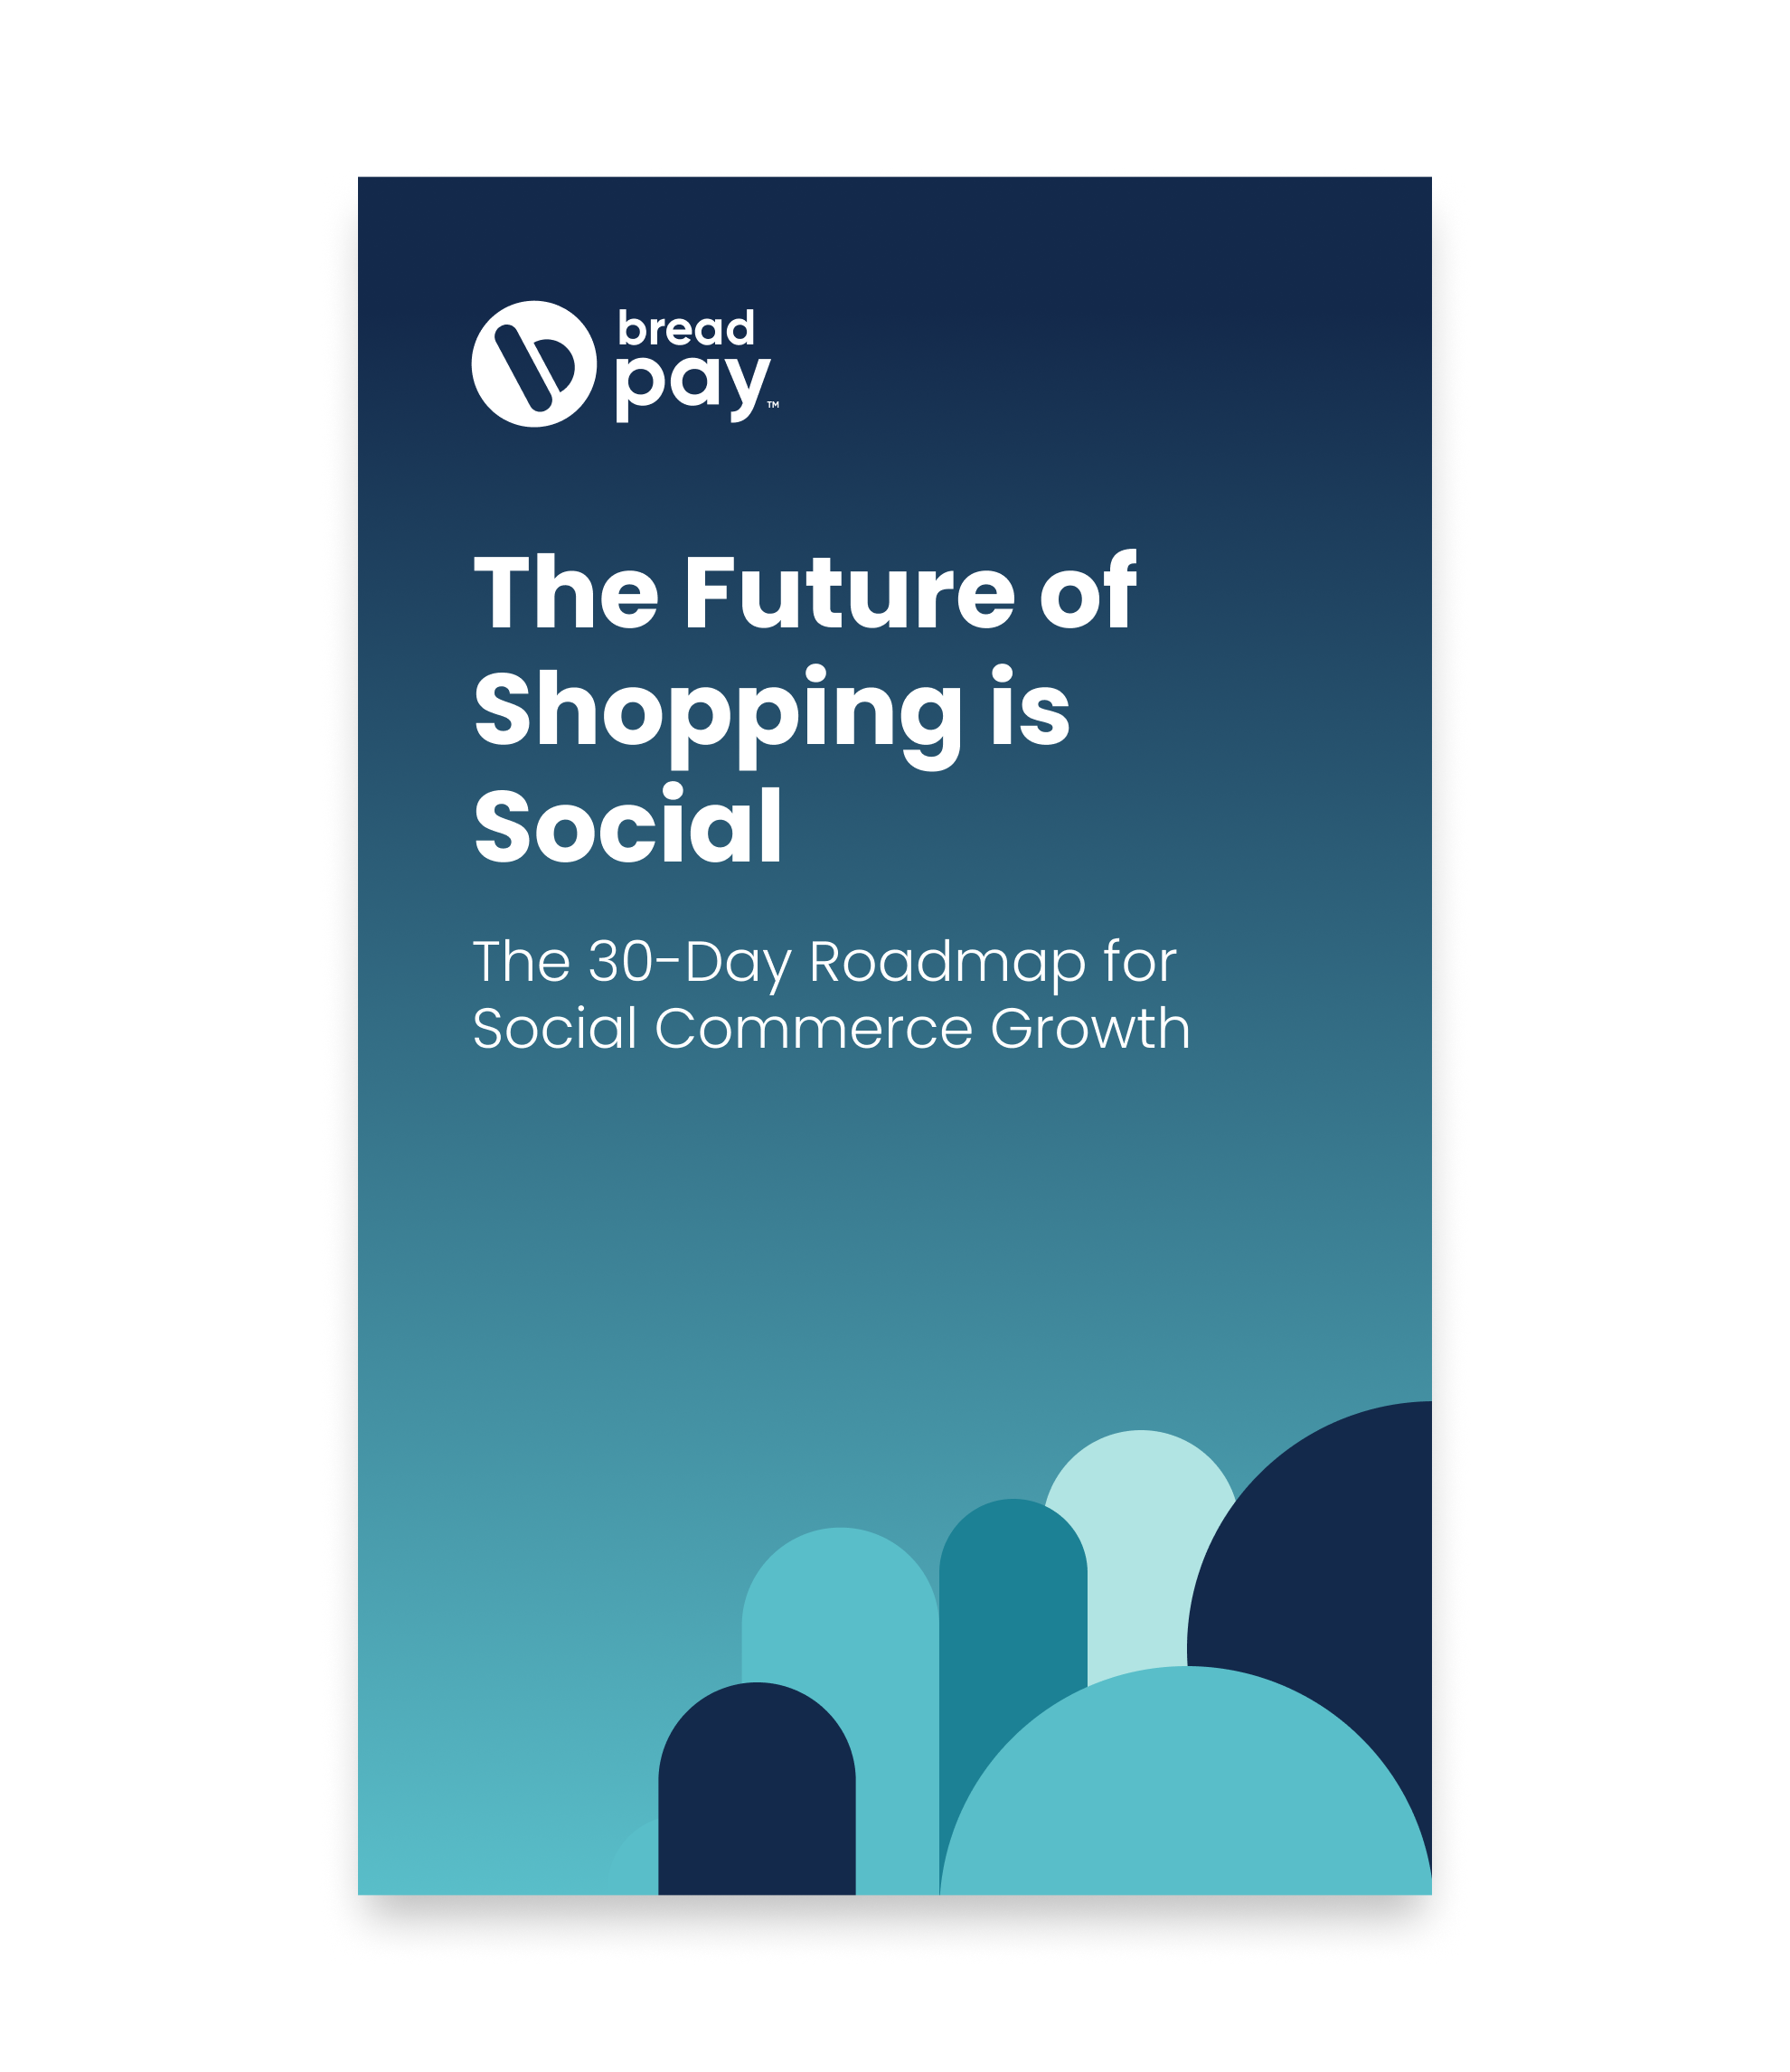 The Future of Shopping is Social